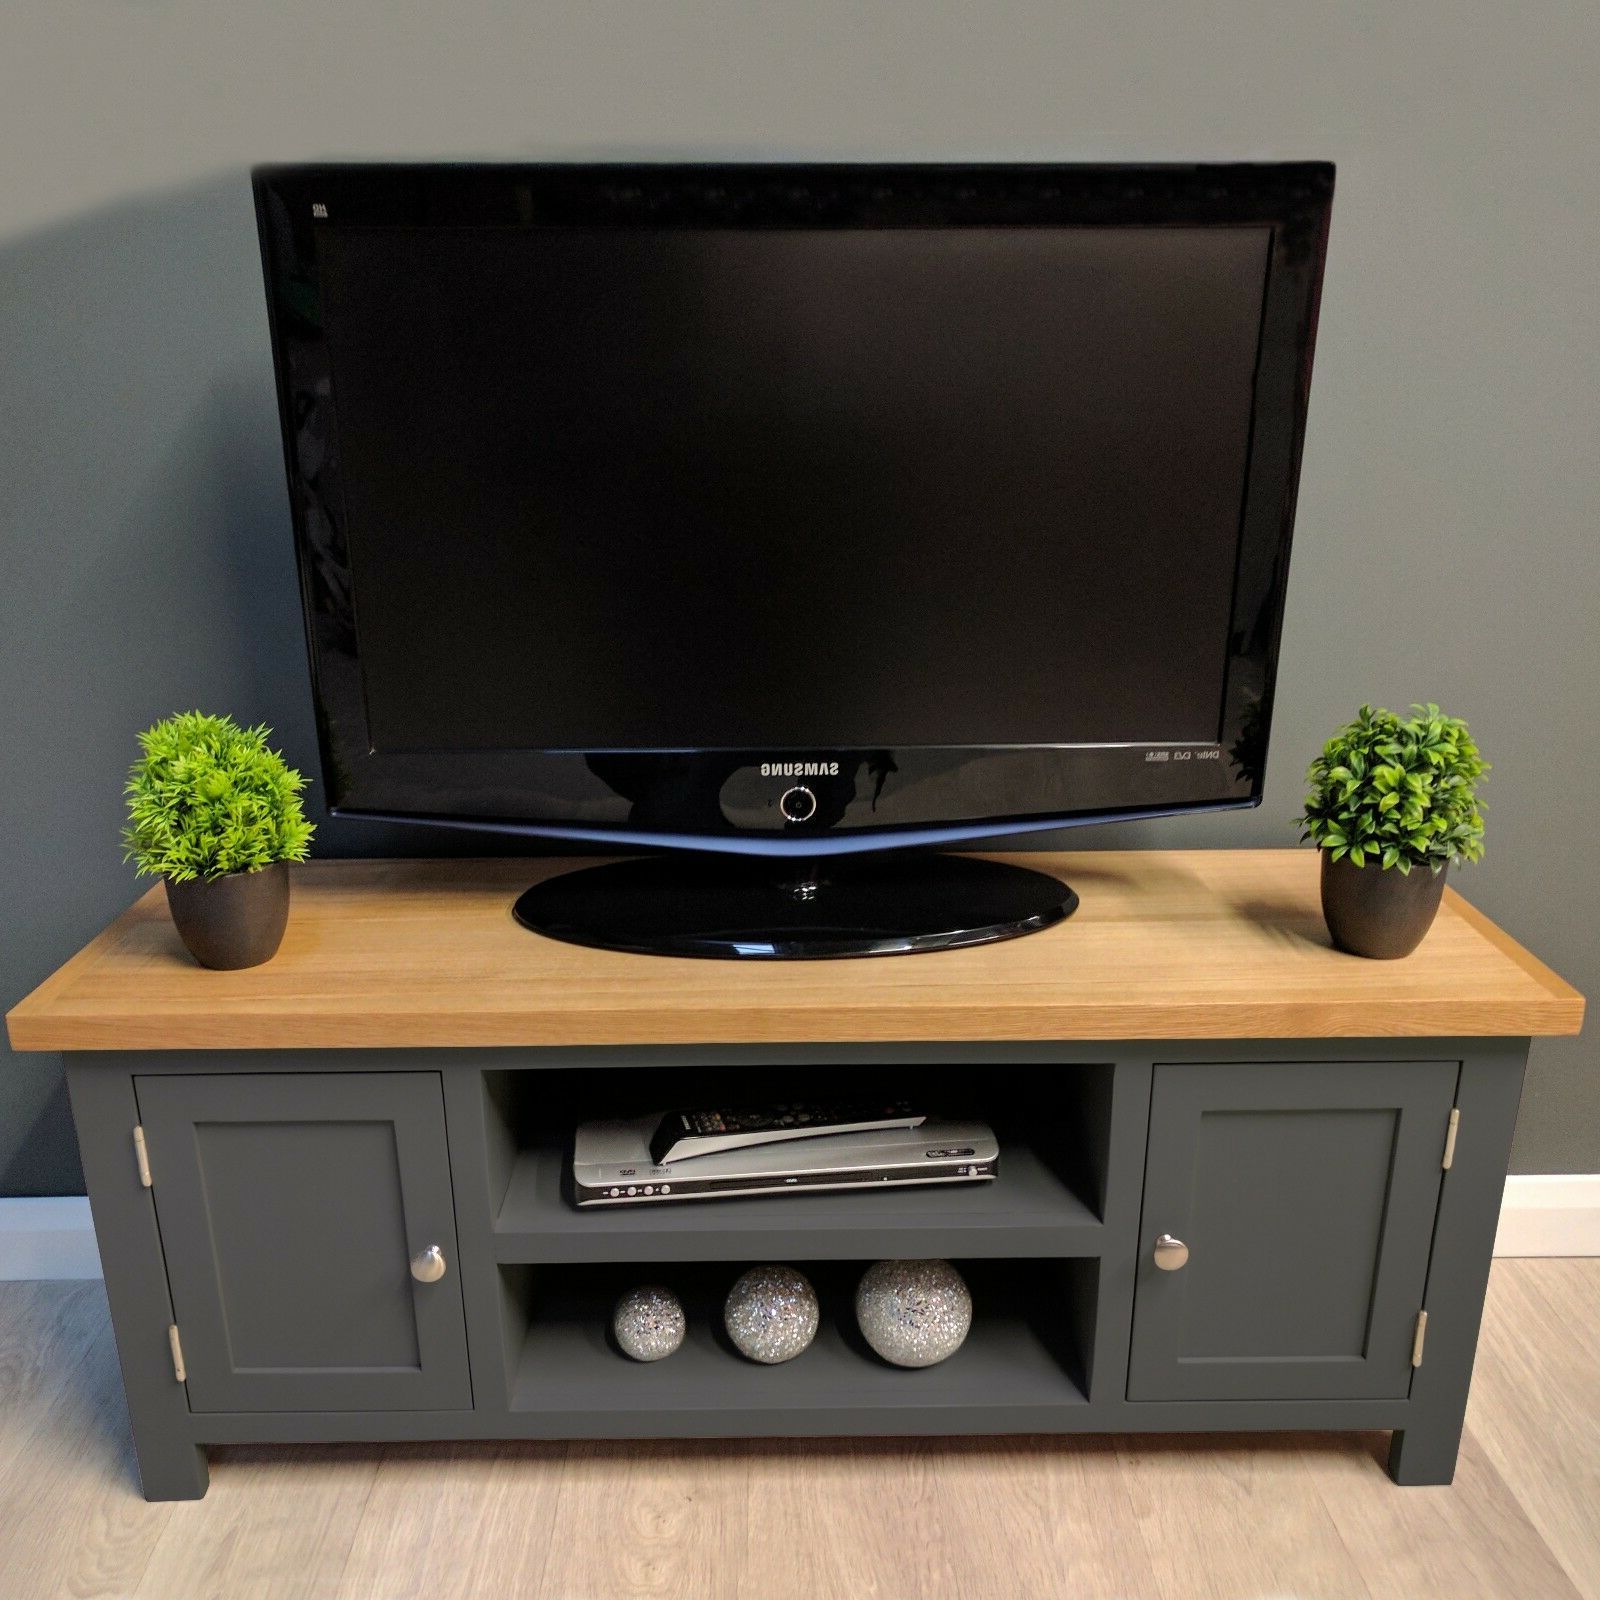 Painted Oak Tv Unit Large / Solid Wood / Dark Grey / Tv Within Carbon Tv Unit Stands (View 8 of 20)